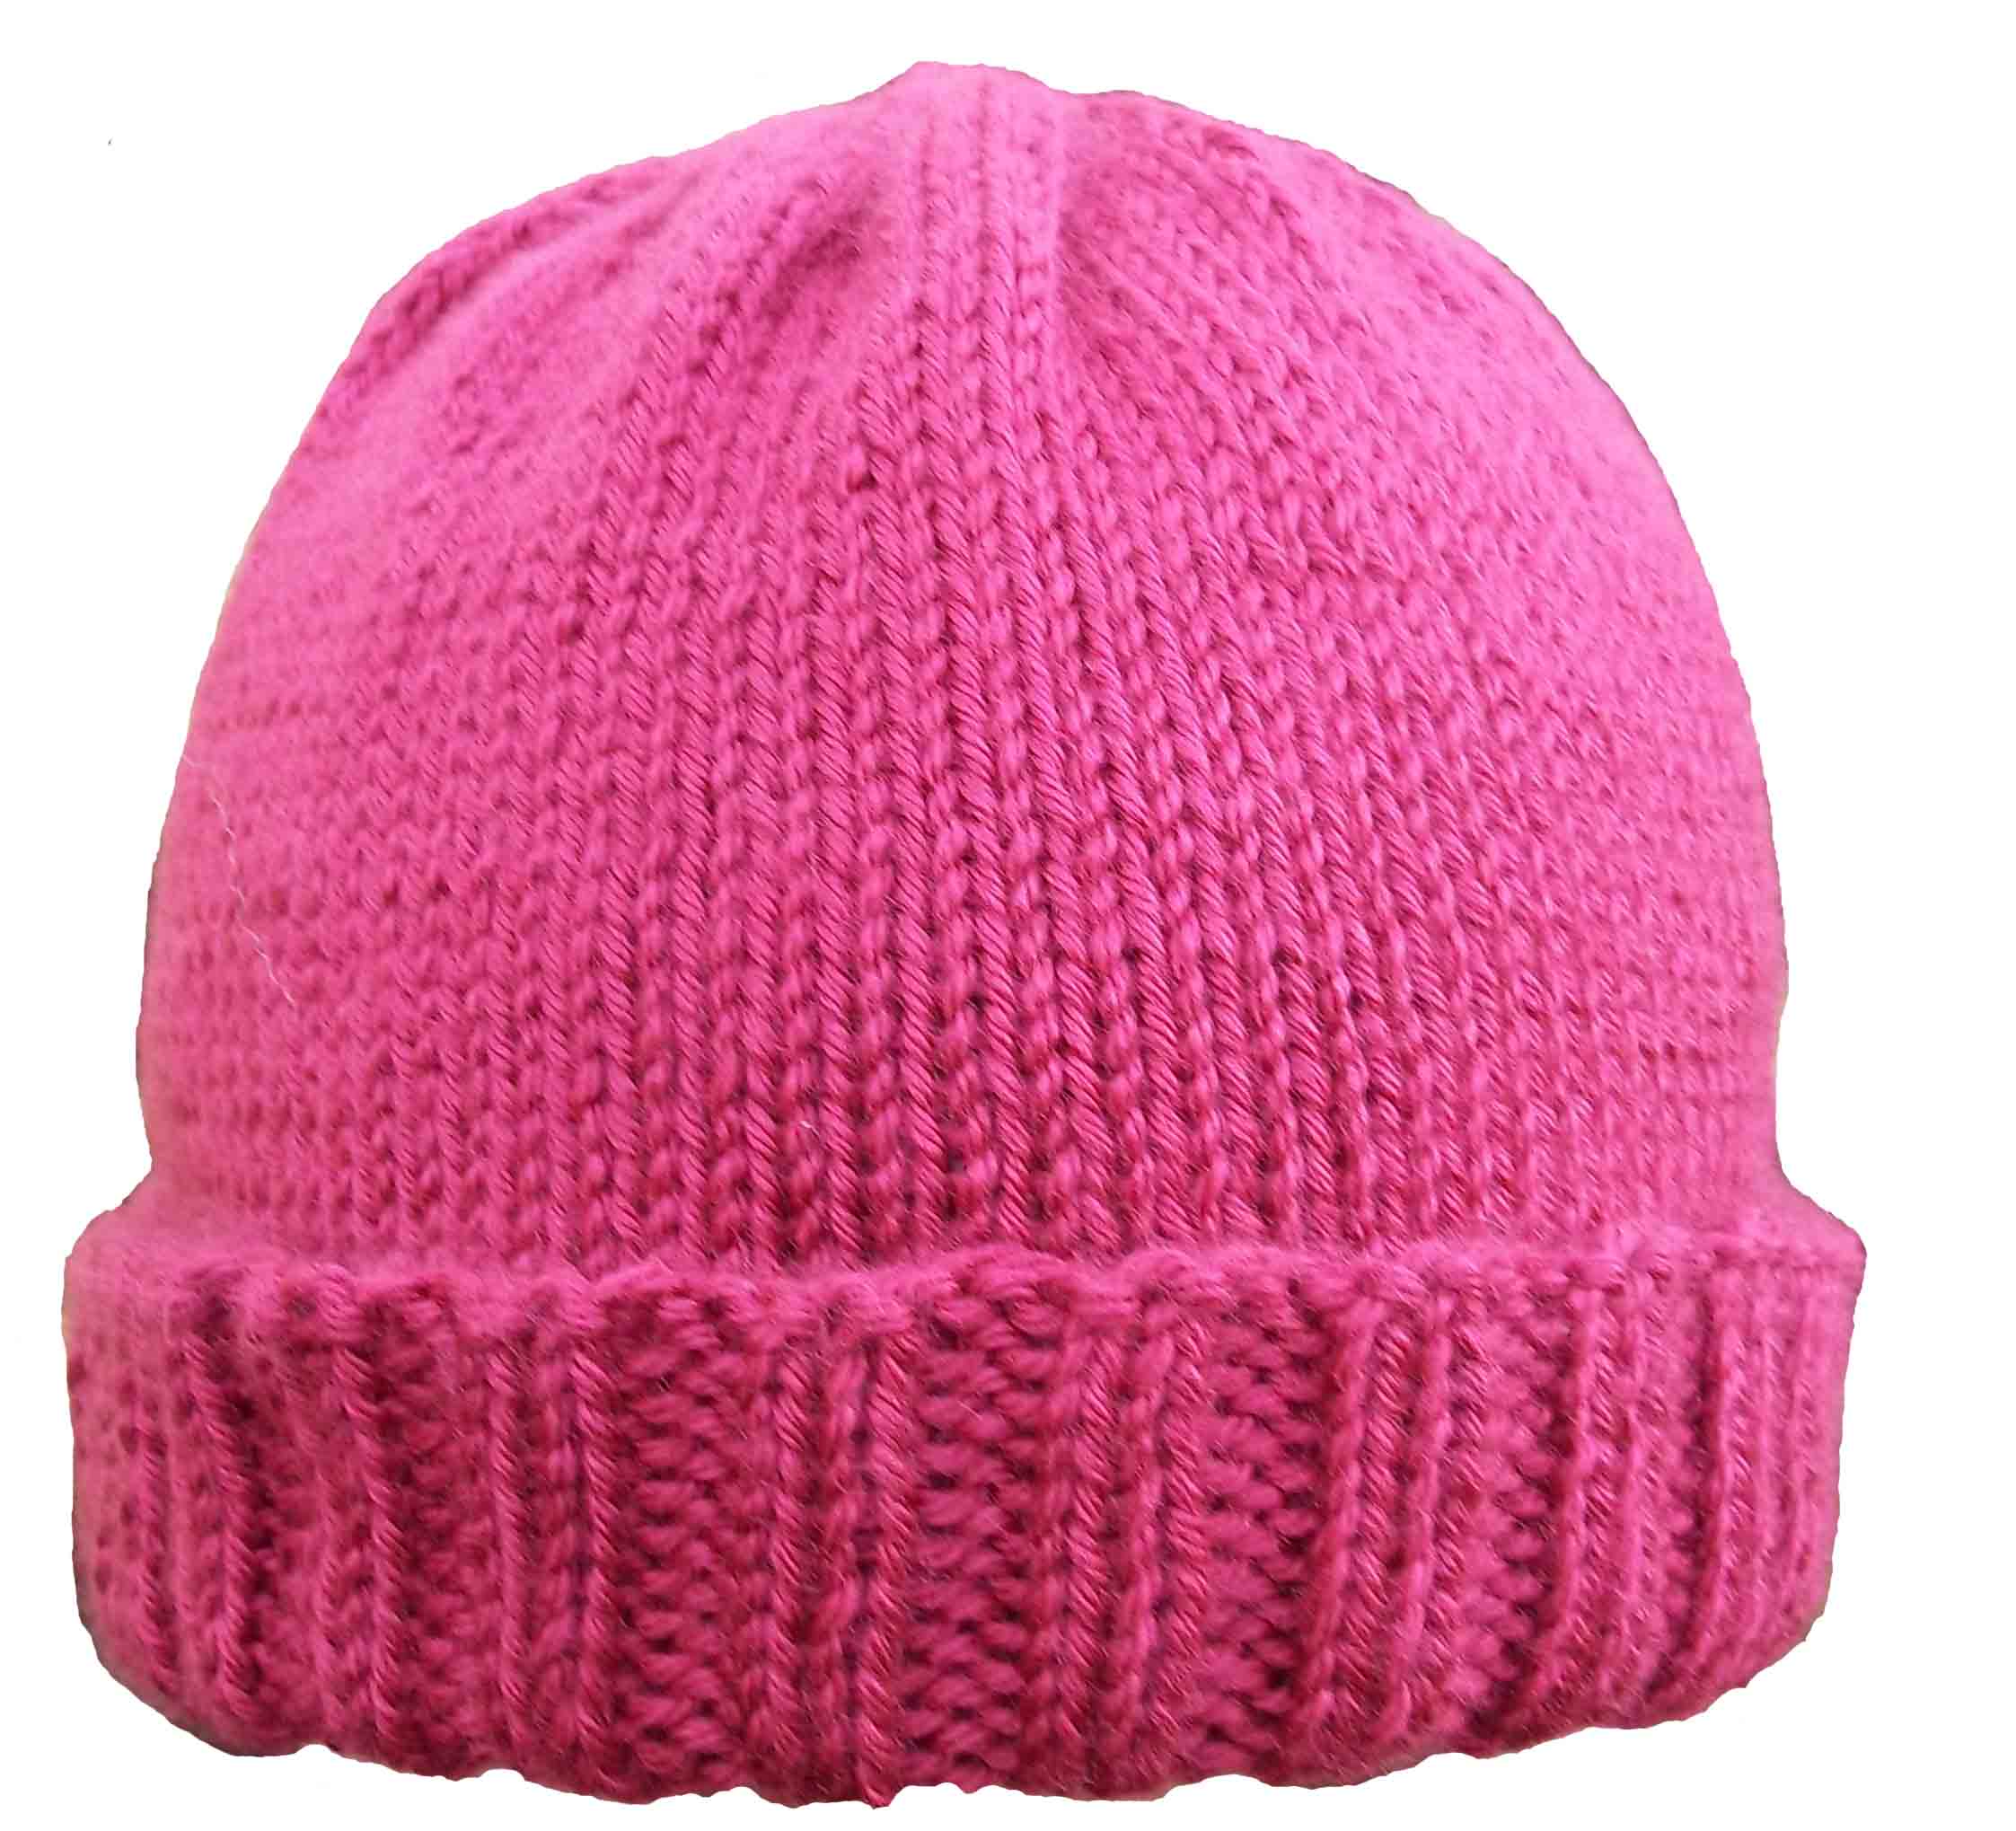 Ru
gged Ribbed Hat - Exquisite knit &amp; crochet designs with fine yarns